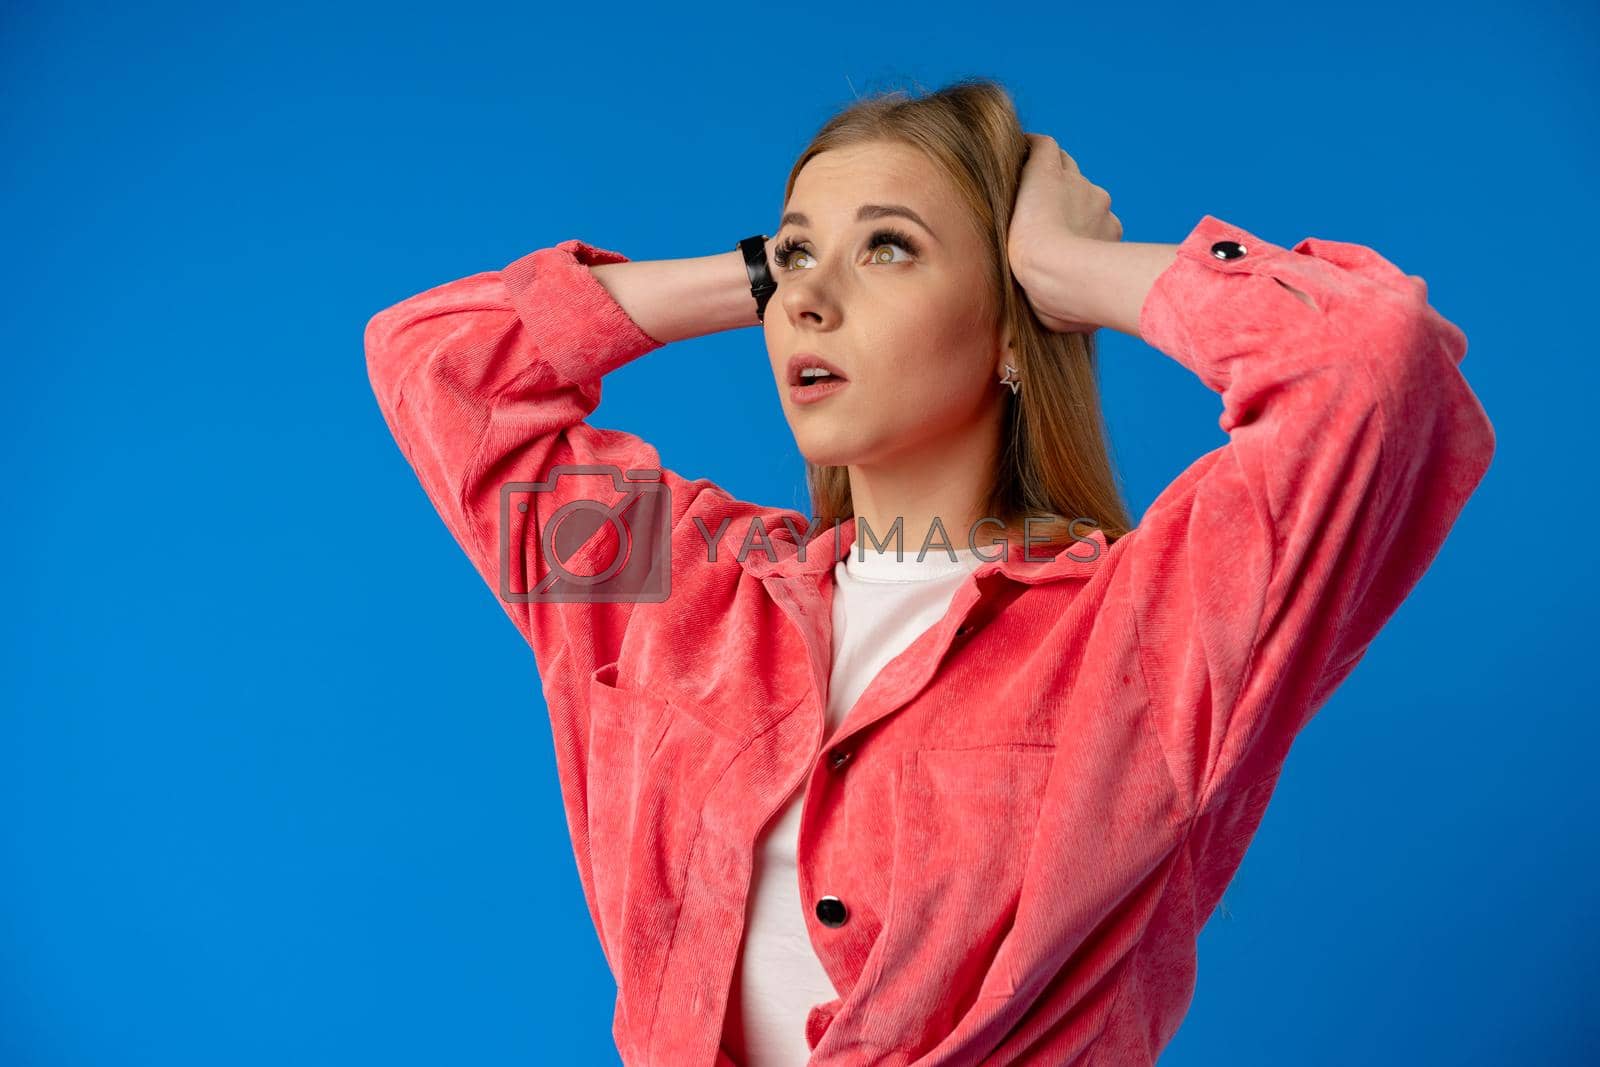 Royalty free image of Negative nervous young woman in trouble over blue background by Fabrikasimf